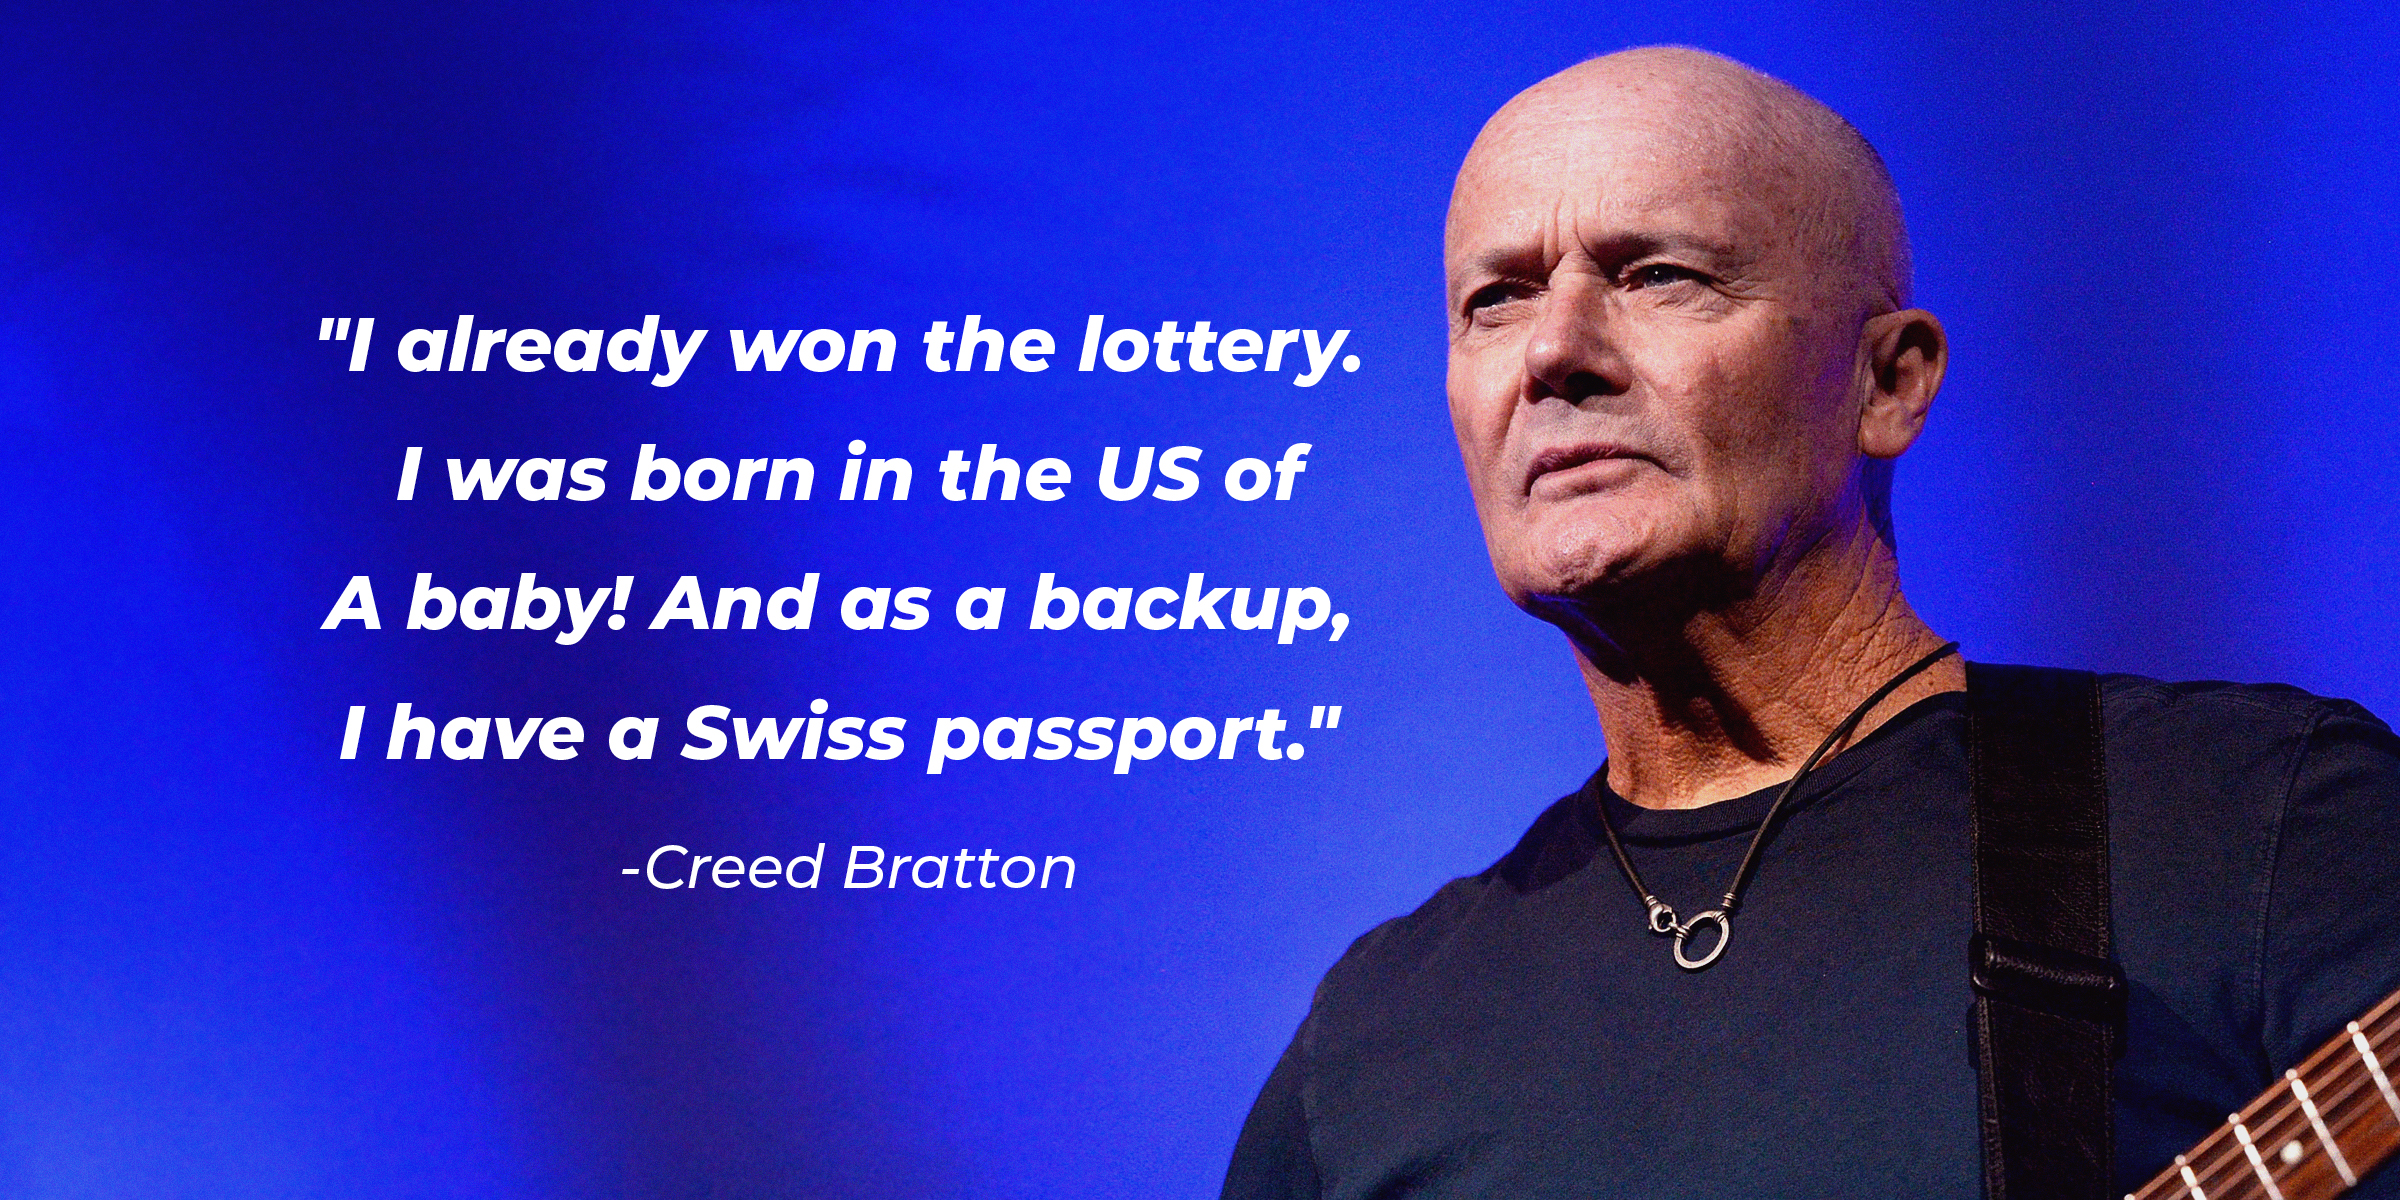 A photo of Creed Bratton with the quote: "I already won the lottery. I was born in the US of A baby! And as a backup, I have a Swiss passport." | Source: Getty Images